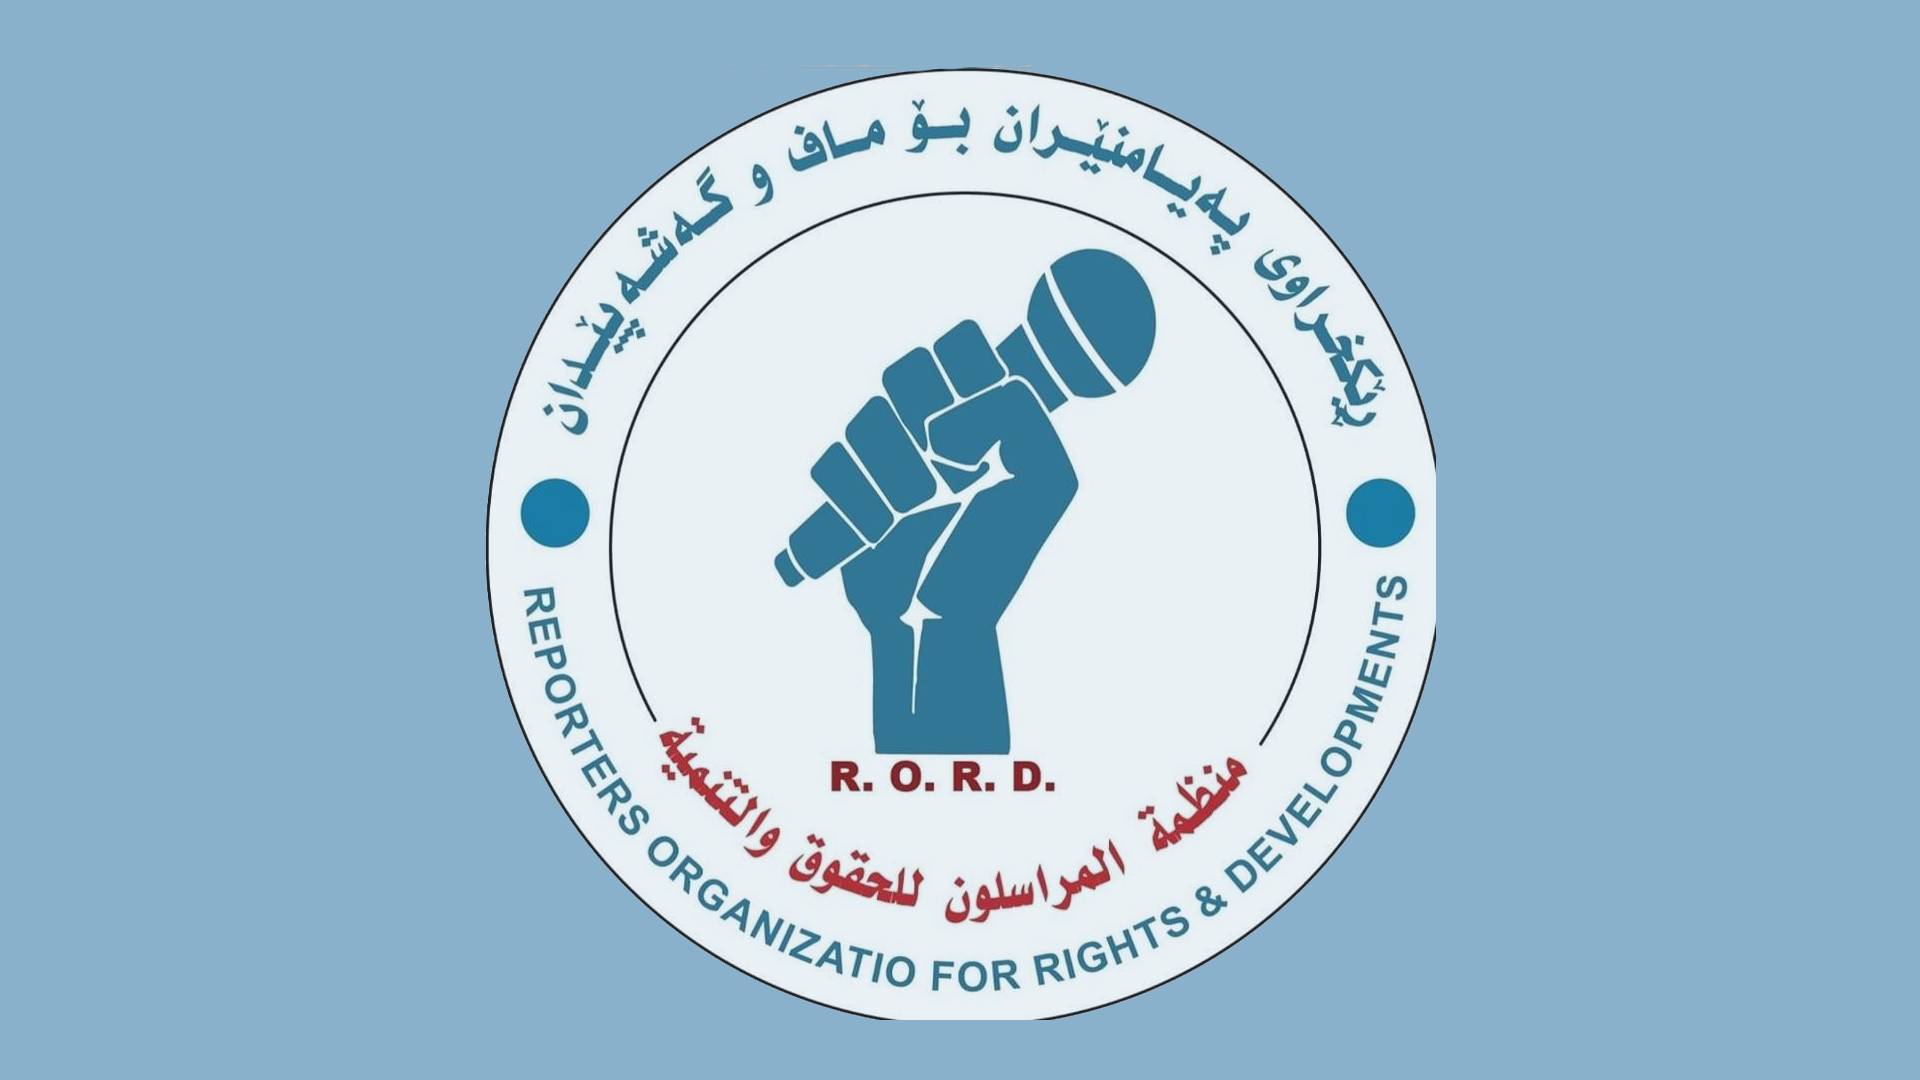  Logo of Reporters Organization for Rights & Development.